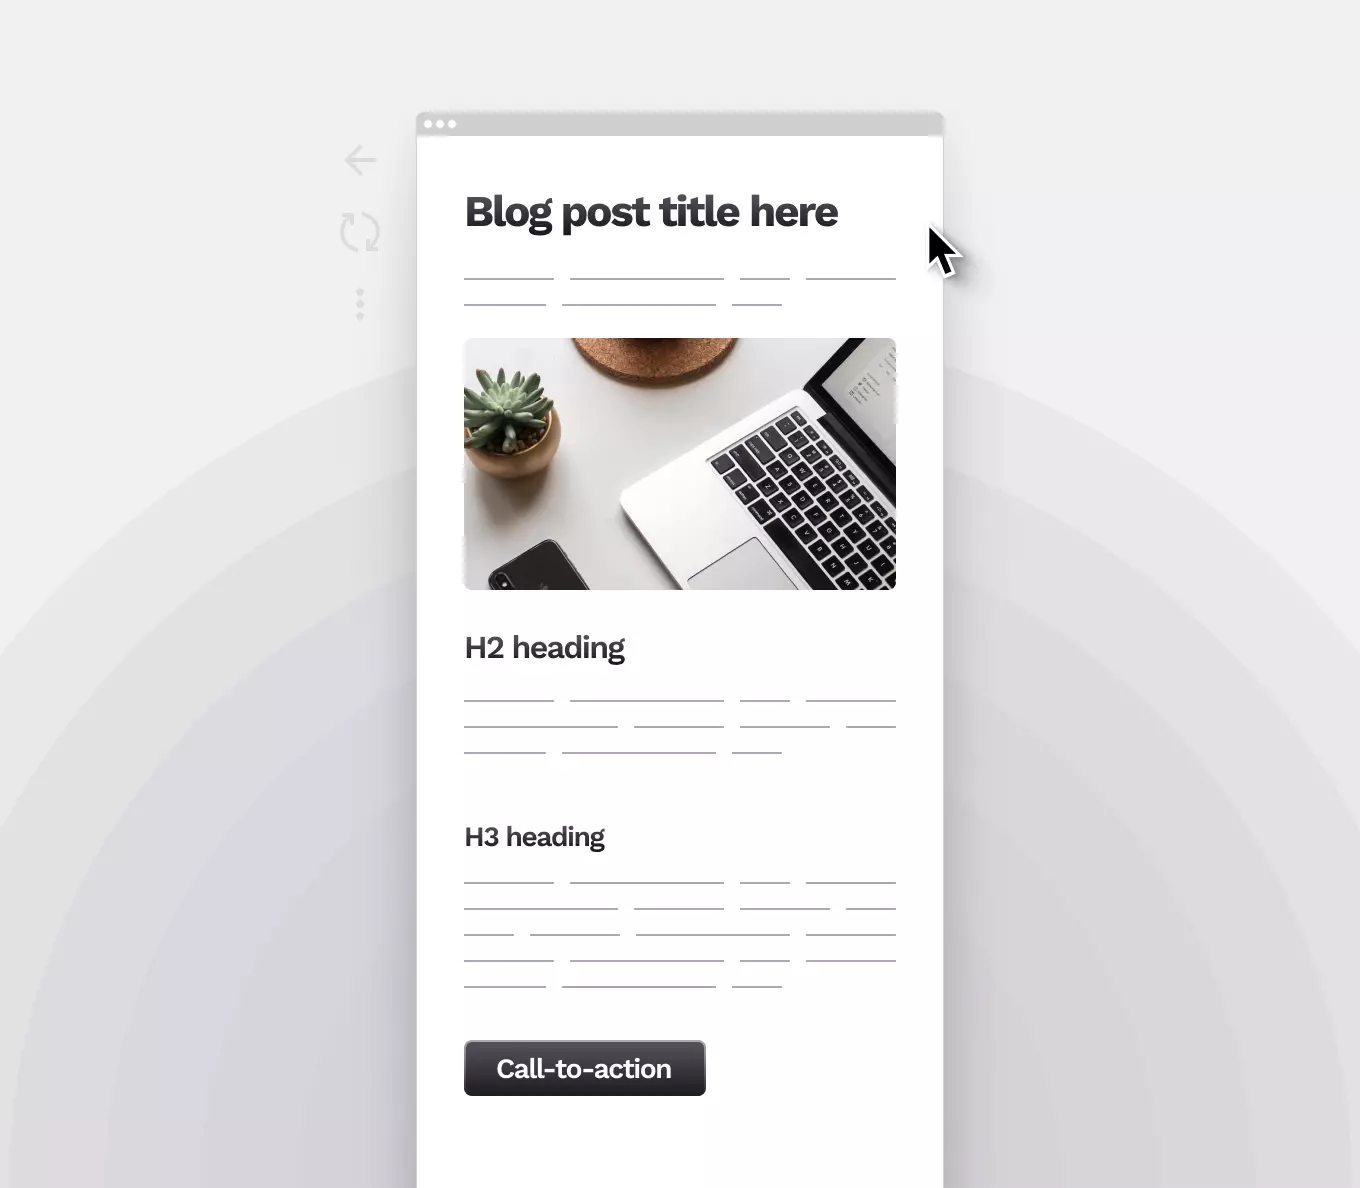 A content writing sample template that shows how to structure a blog post sample: starting with the post title, adding an intro, an image, and structuring the rest with H2 and H3 headings